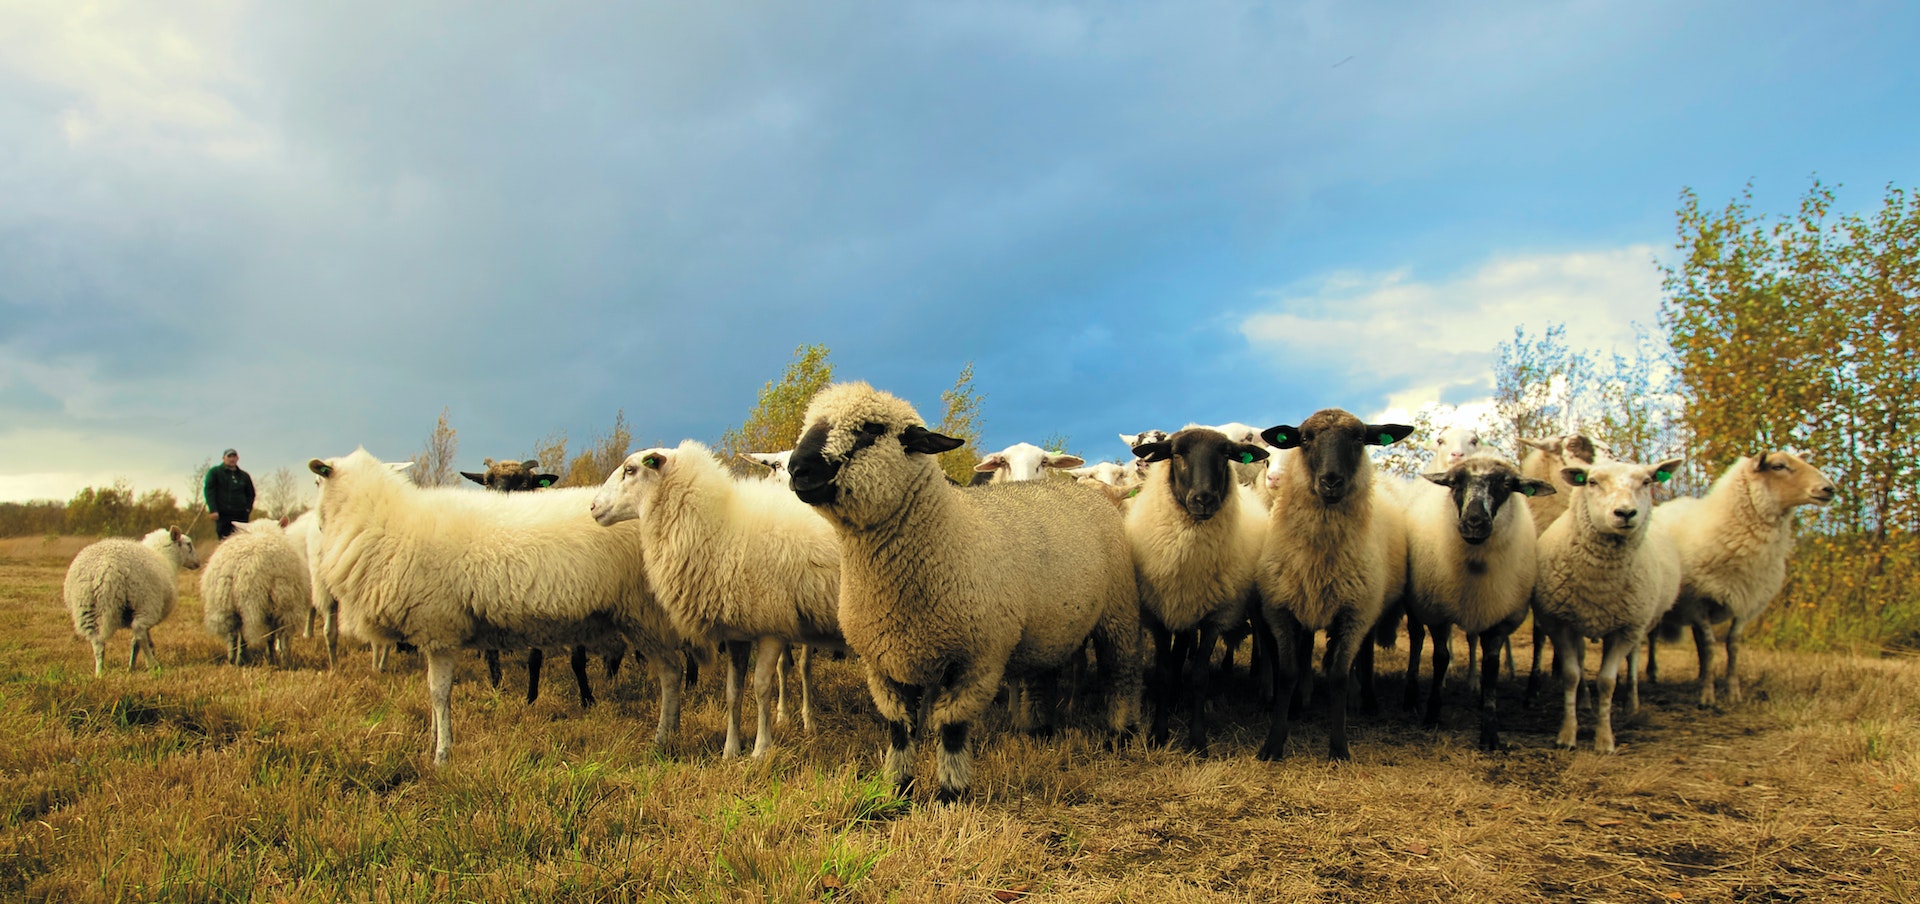 A herd of white-faced and black-faced sheep standing, grouped together, in a field on a cloudy day. 